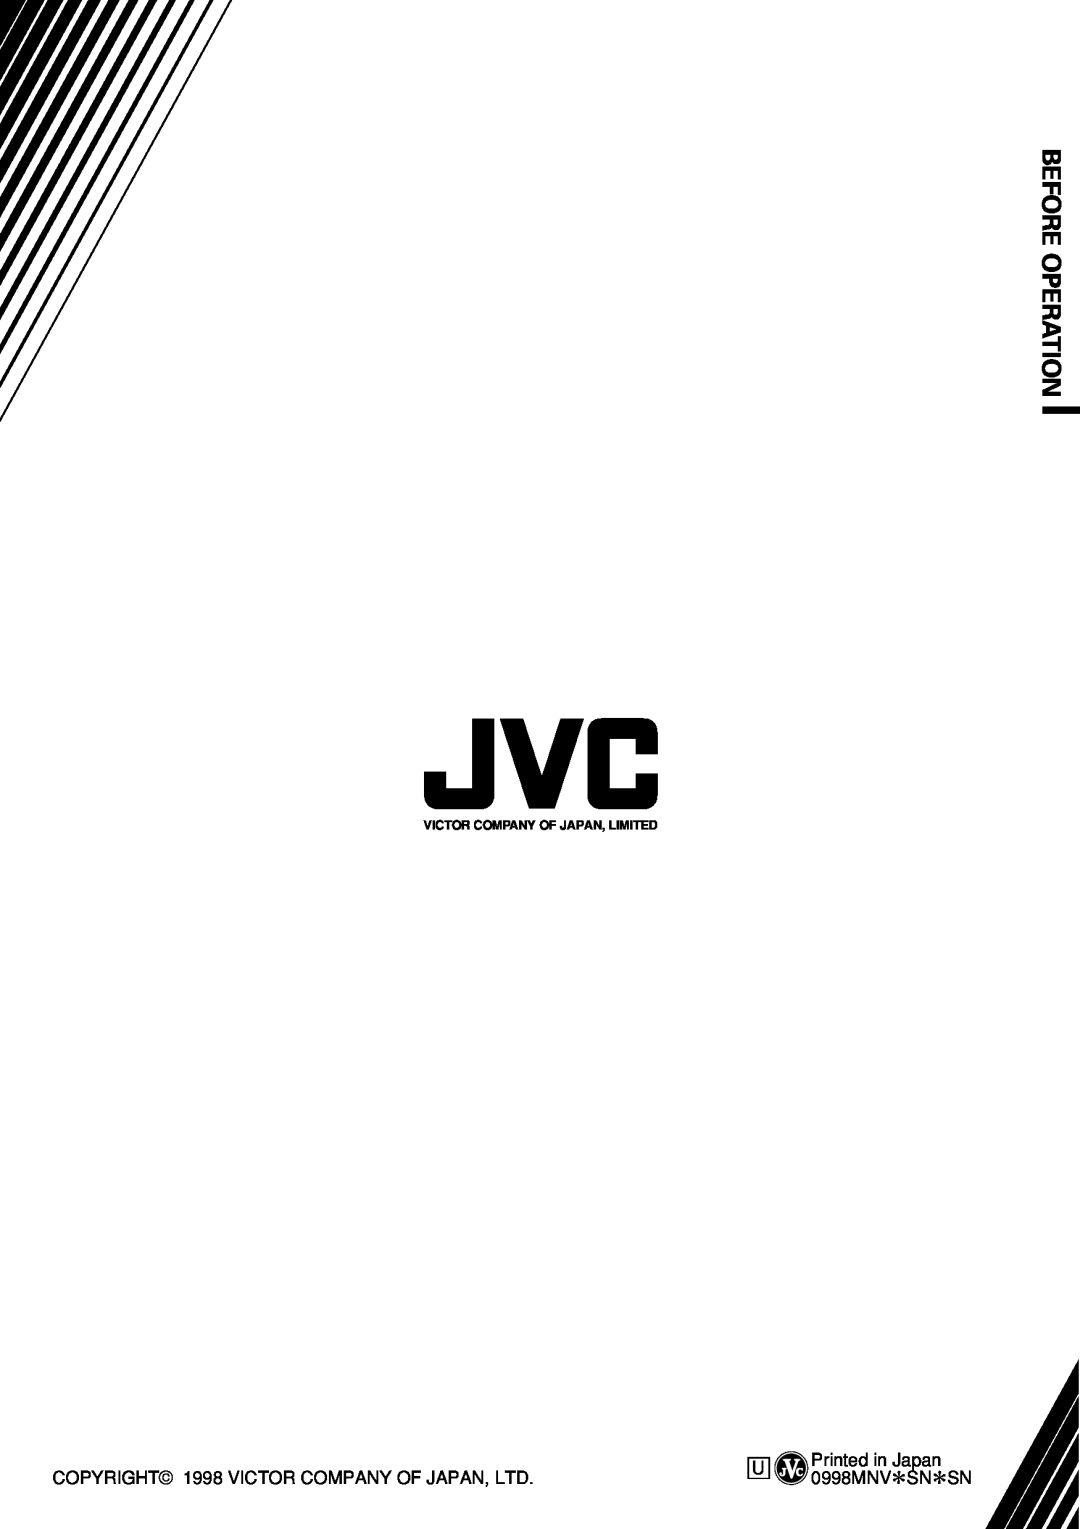 JVC GV-DV1000 manual Tion, Before Opera, Printed in Japan, 0998MNV*SN*SN, Victor Company Of Japan, Limited 